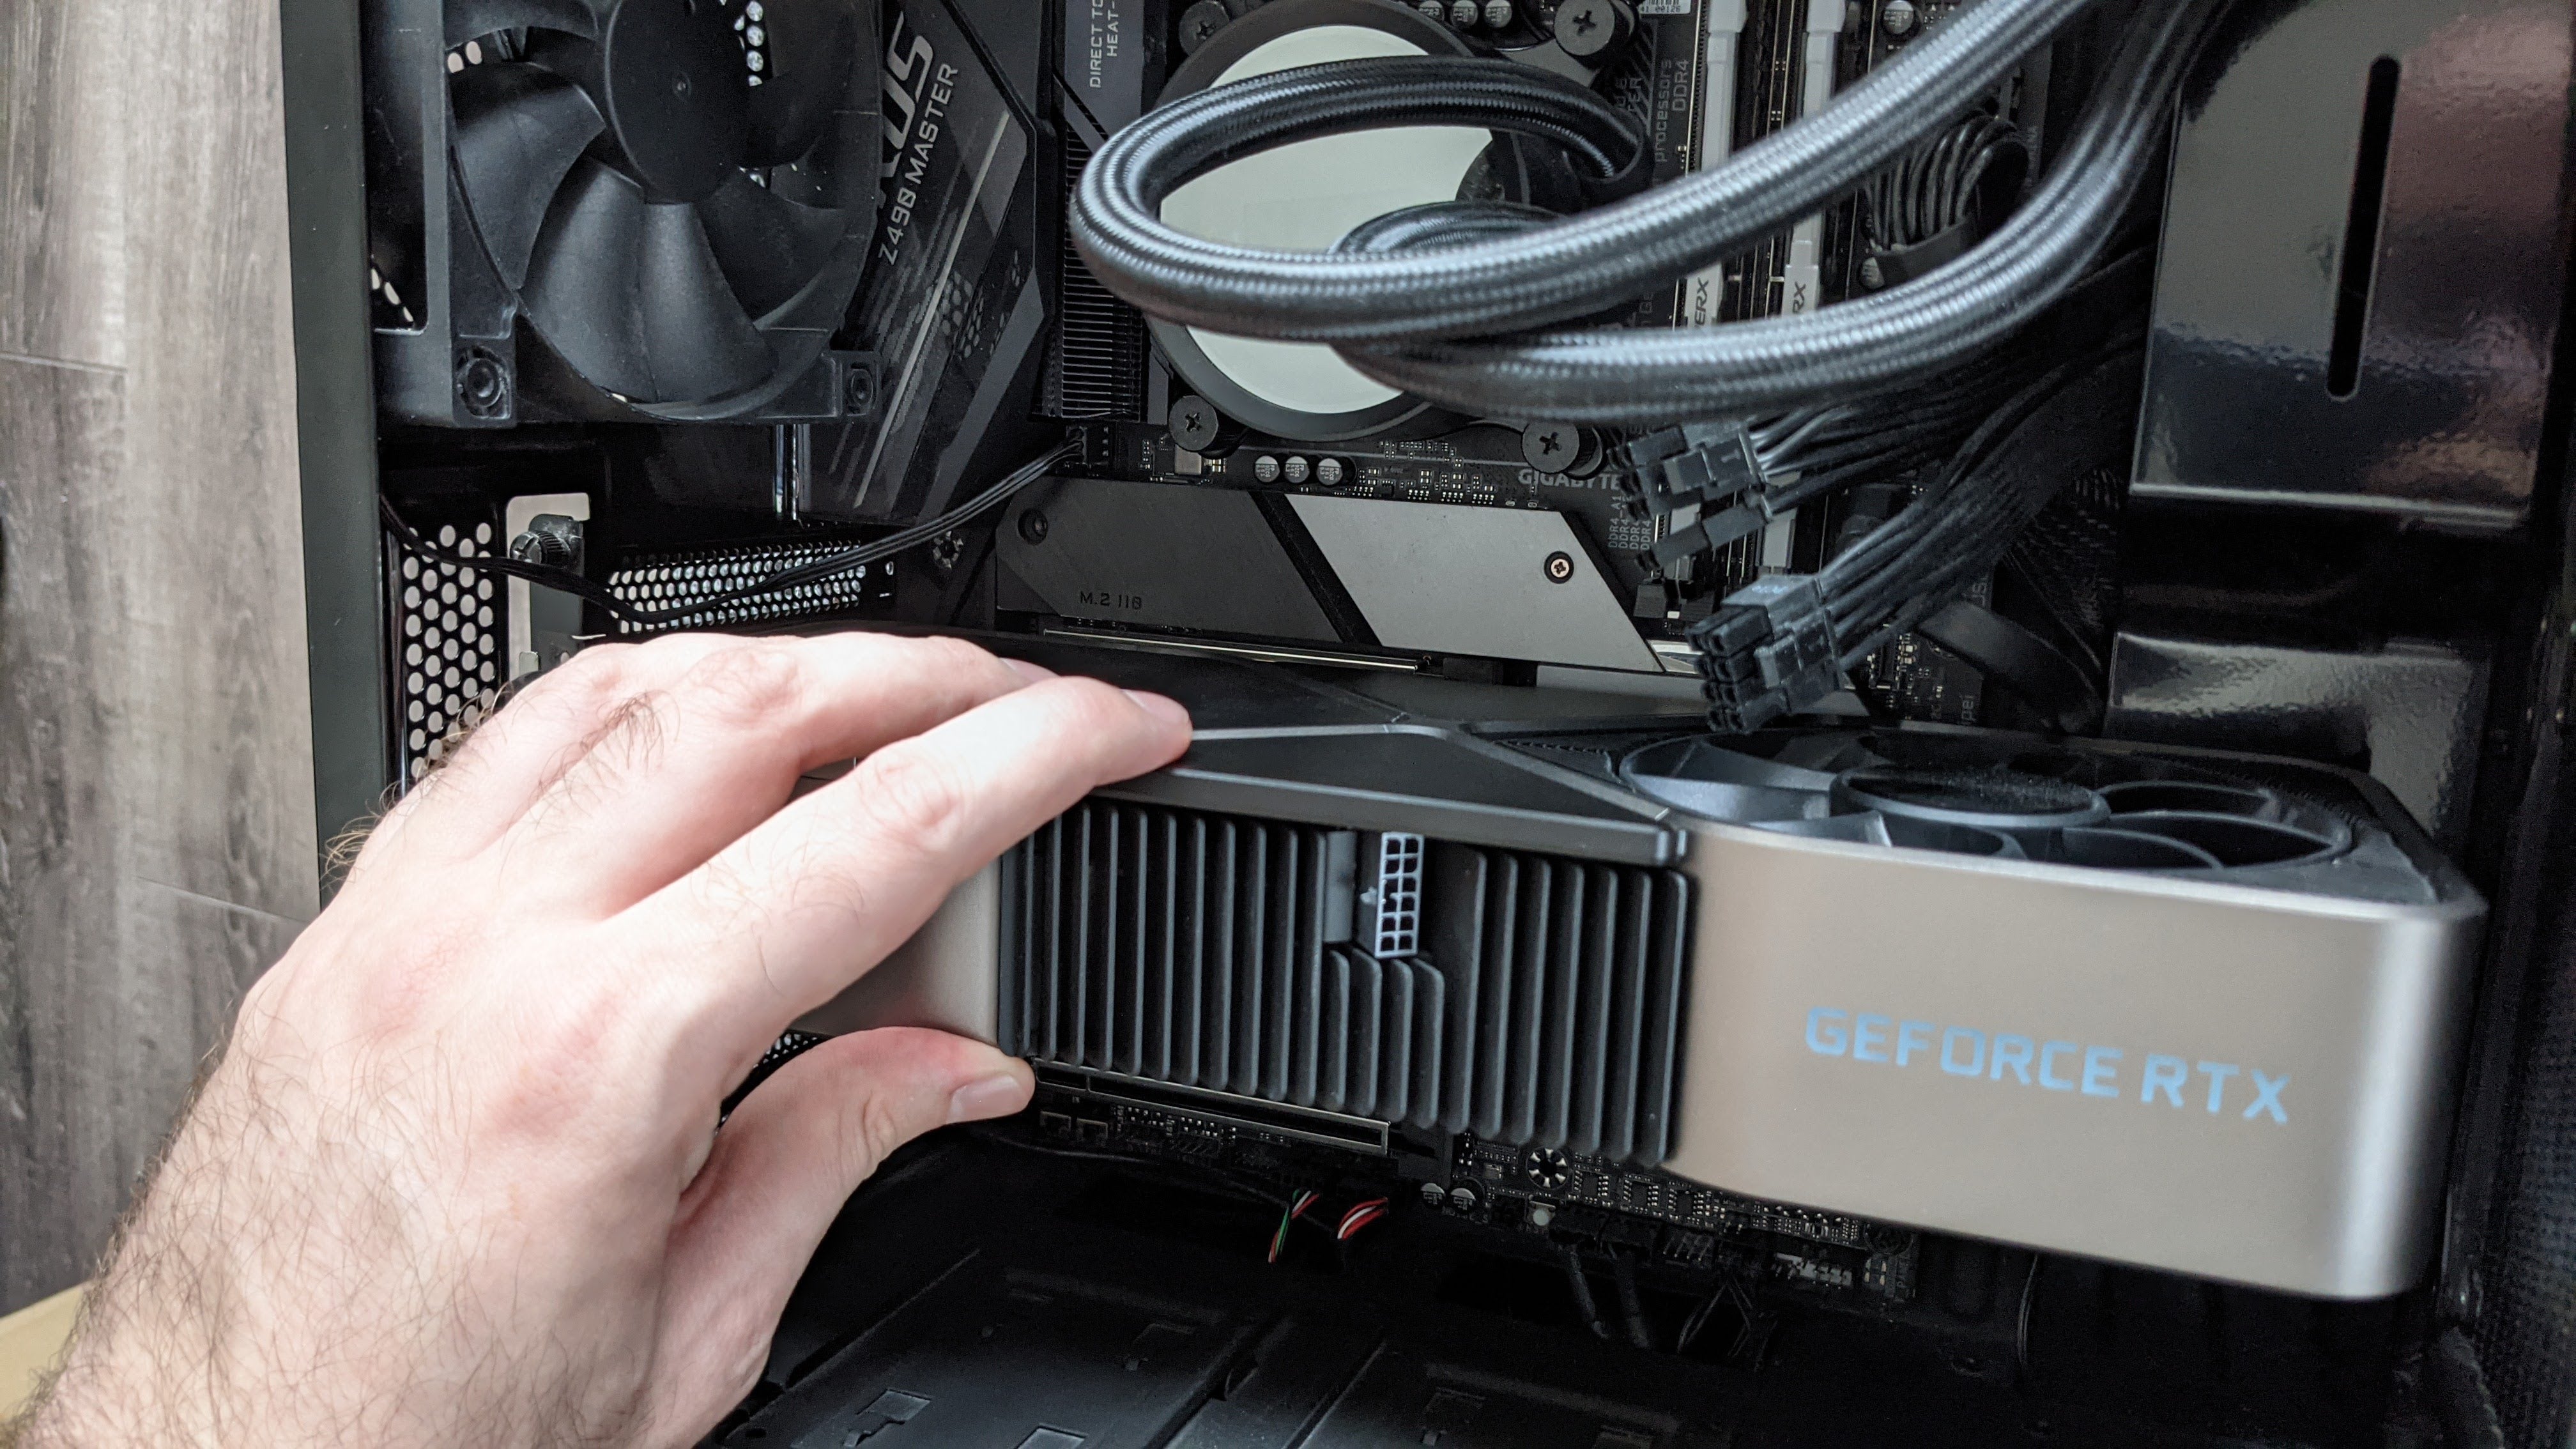 An Nvidia RTX 3090 graphics card being inserted into a motherboard's PCIe x16 slot.